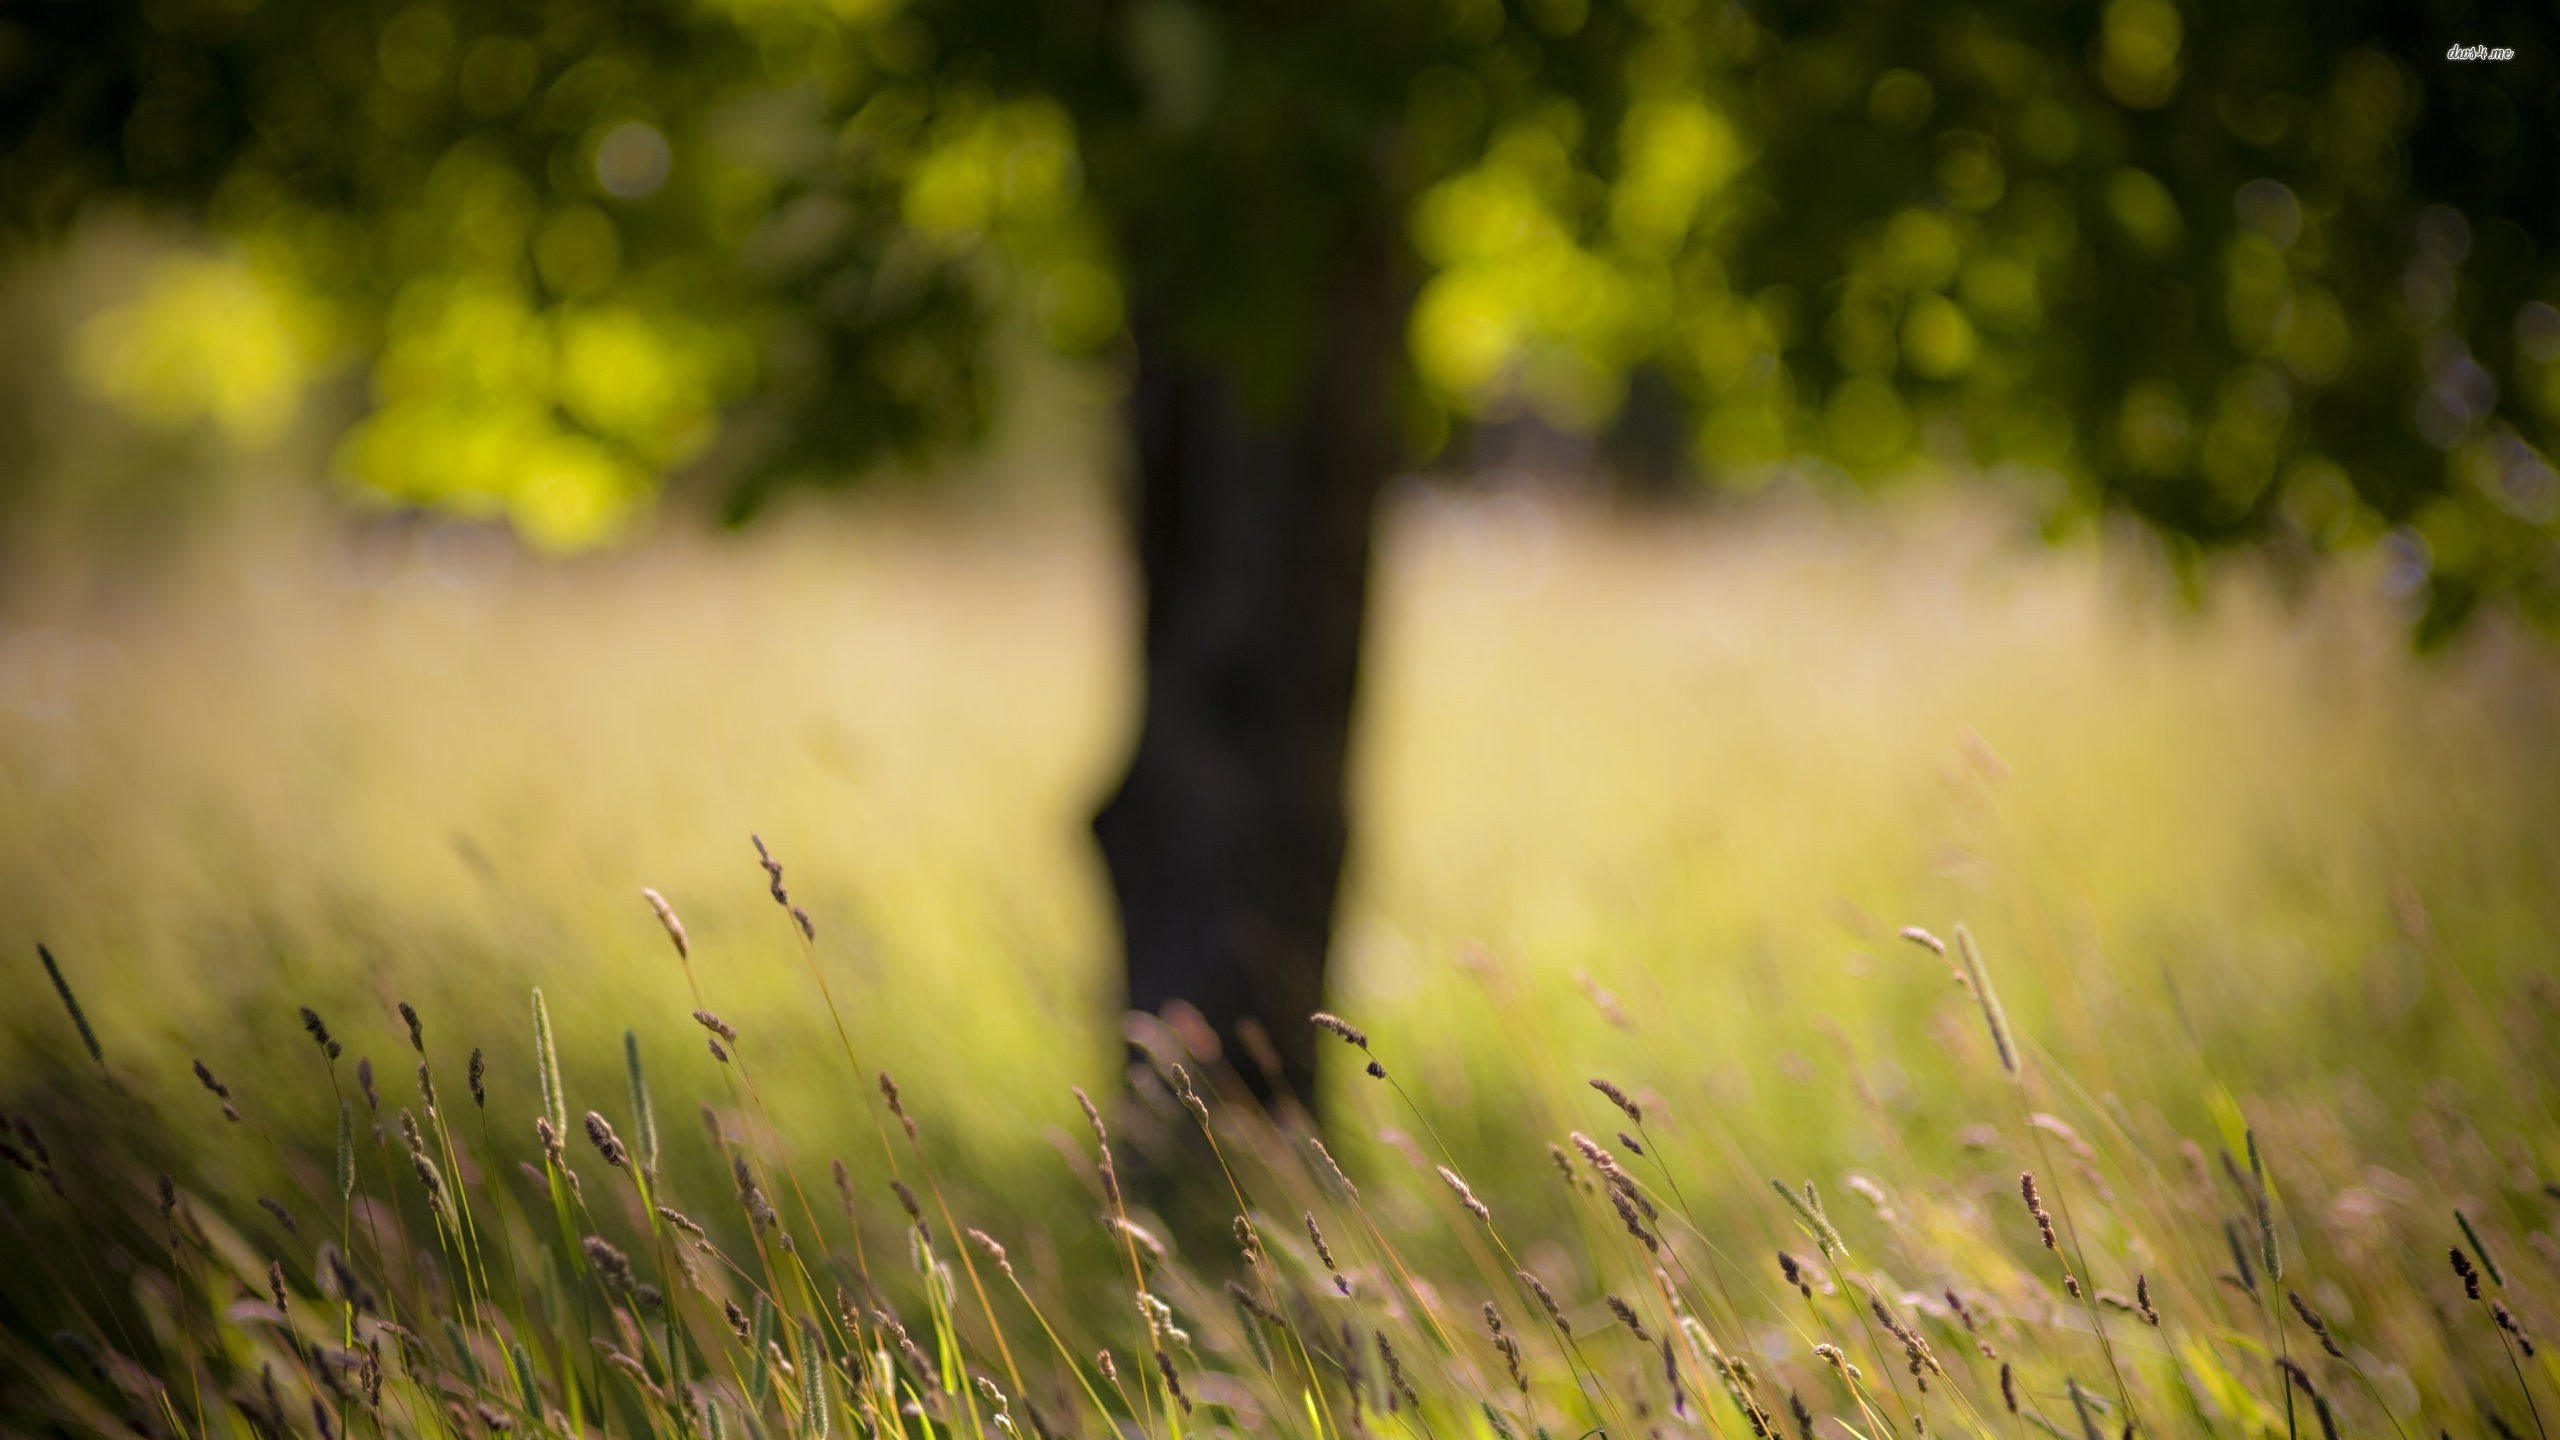 Grass with tree in the background wallpaper - Photography ...